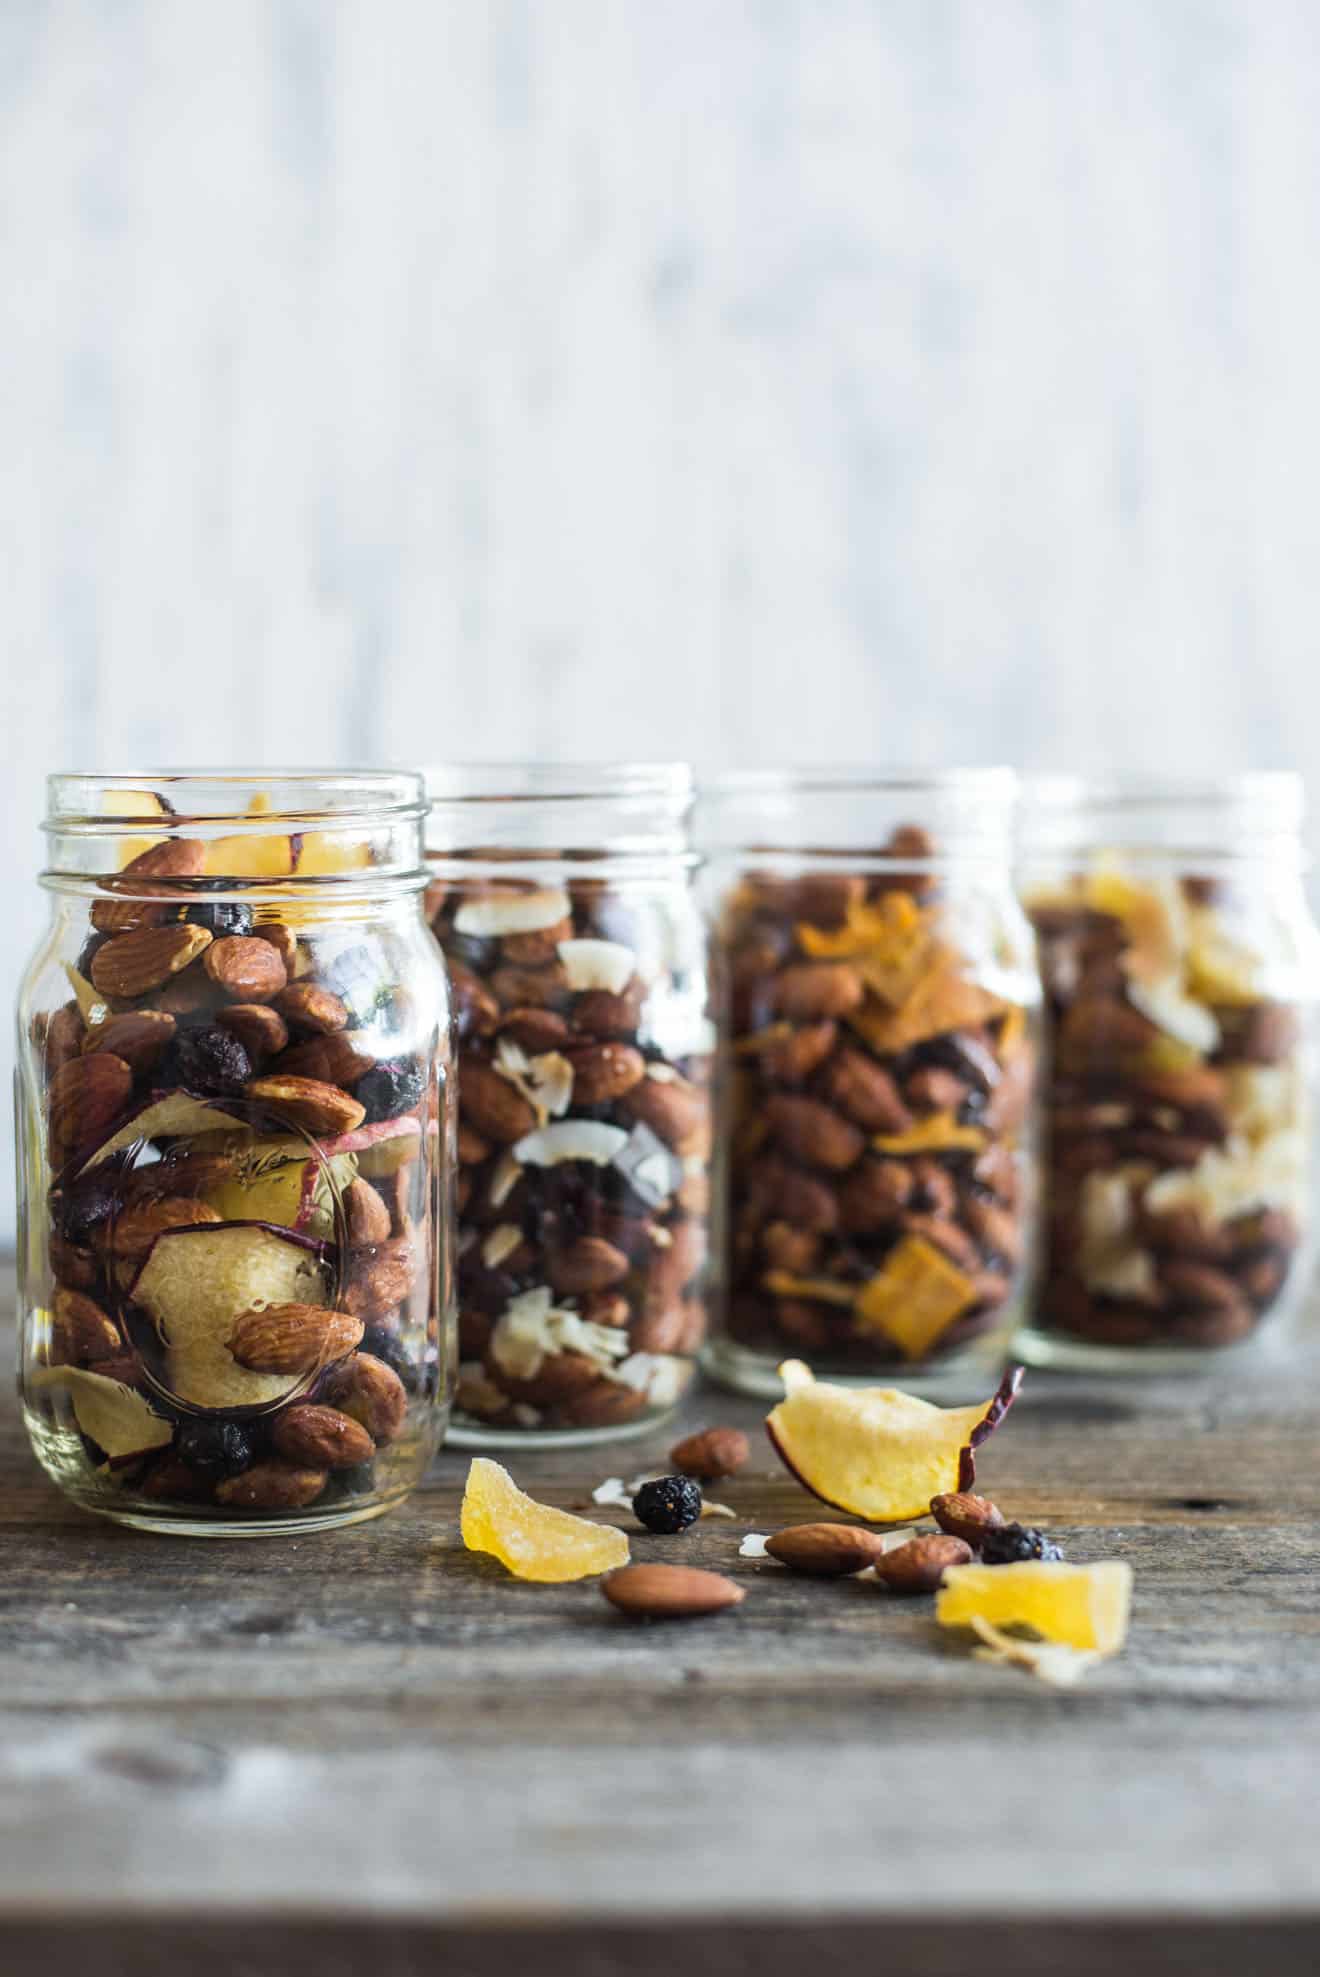 4 Easy Trail Mix Recipes with Almonds - here's 4 healthy snacks that you can make at home! They're gluten free and take only 15 minutes to prepare! by @healthynibs